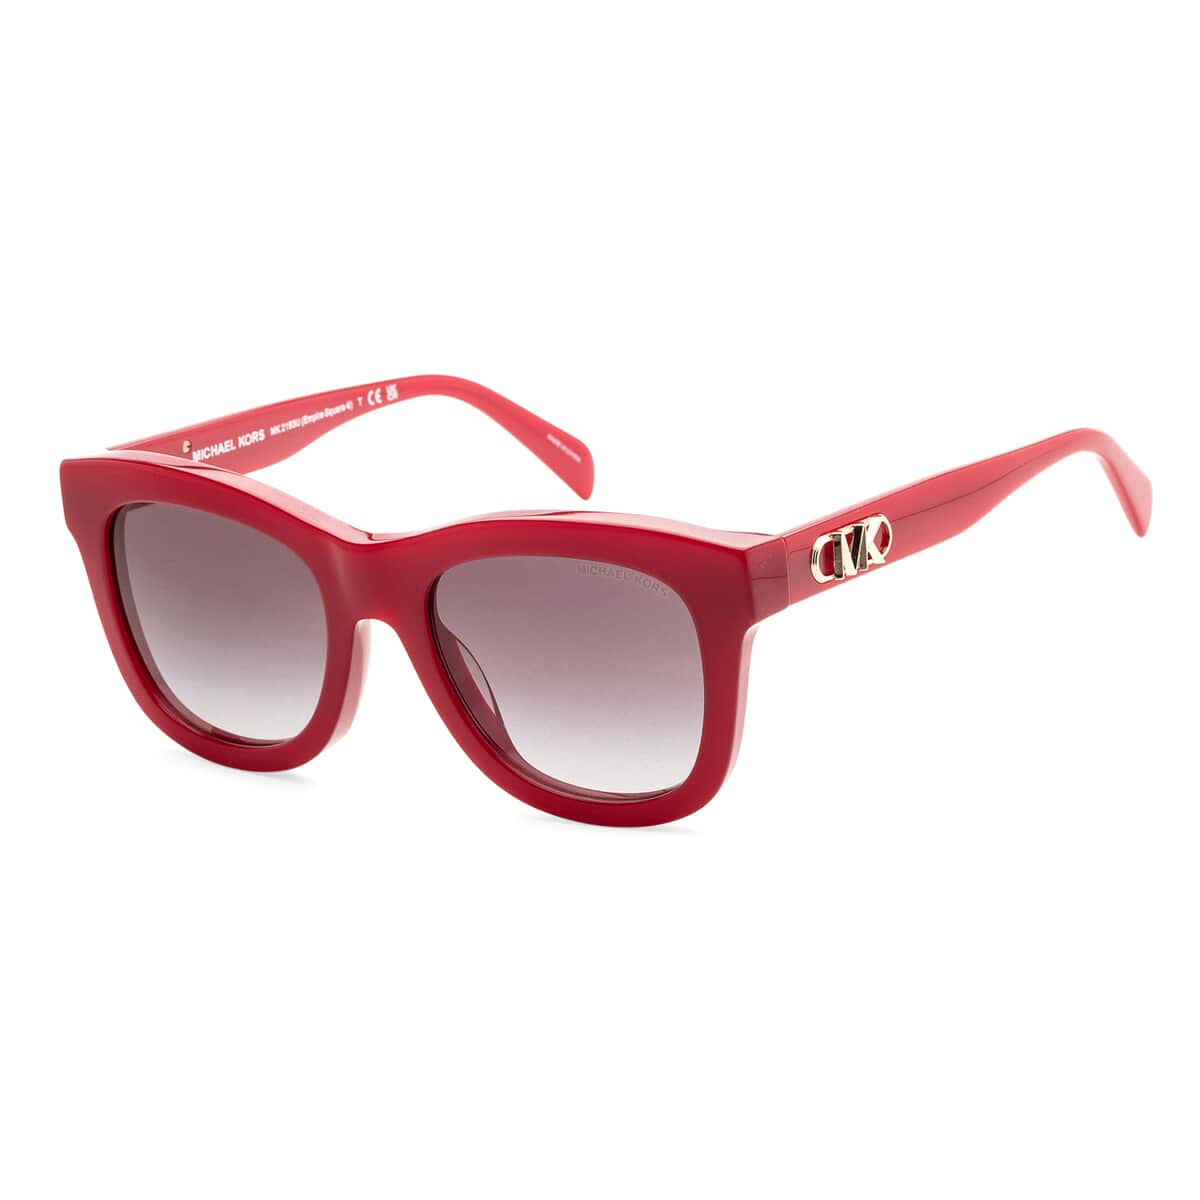 Michael Kors Women's Red Aviator Sunglasses with Protection Case image number 0